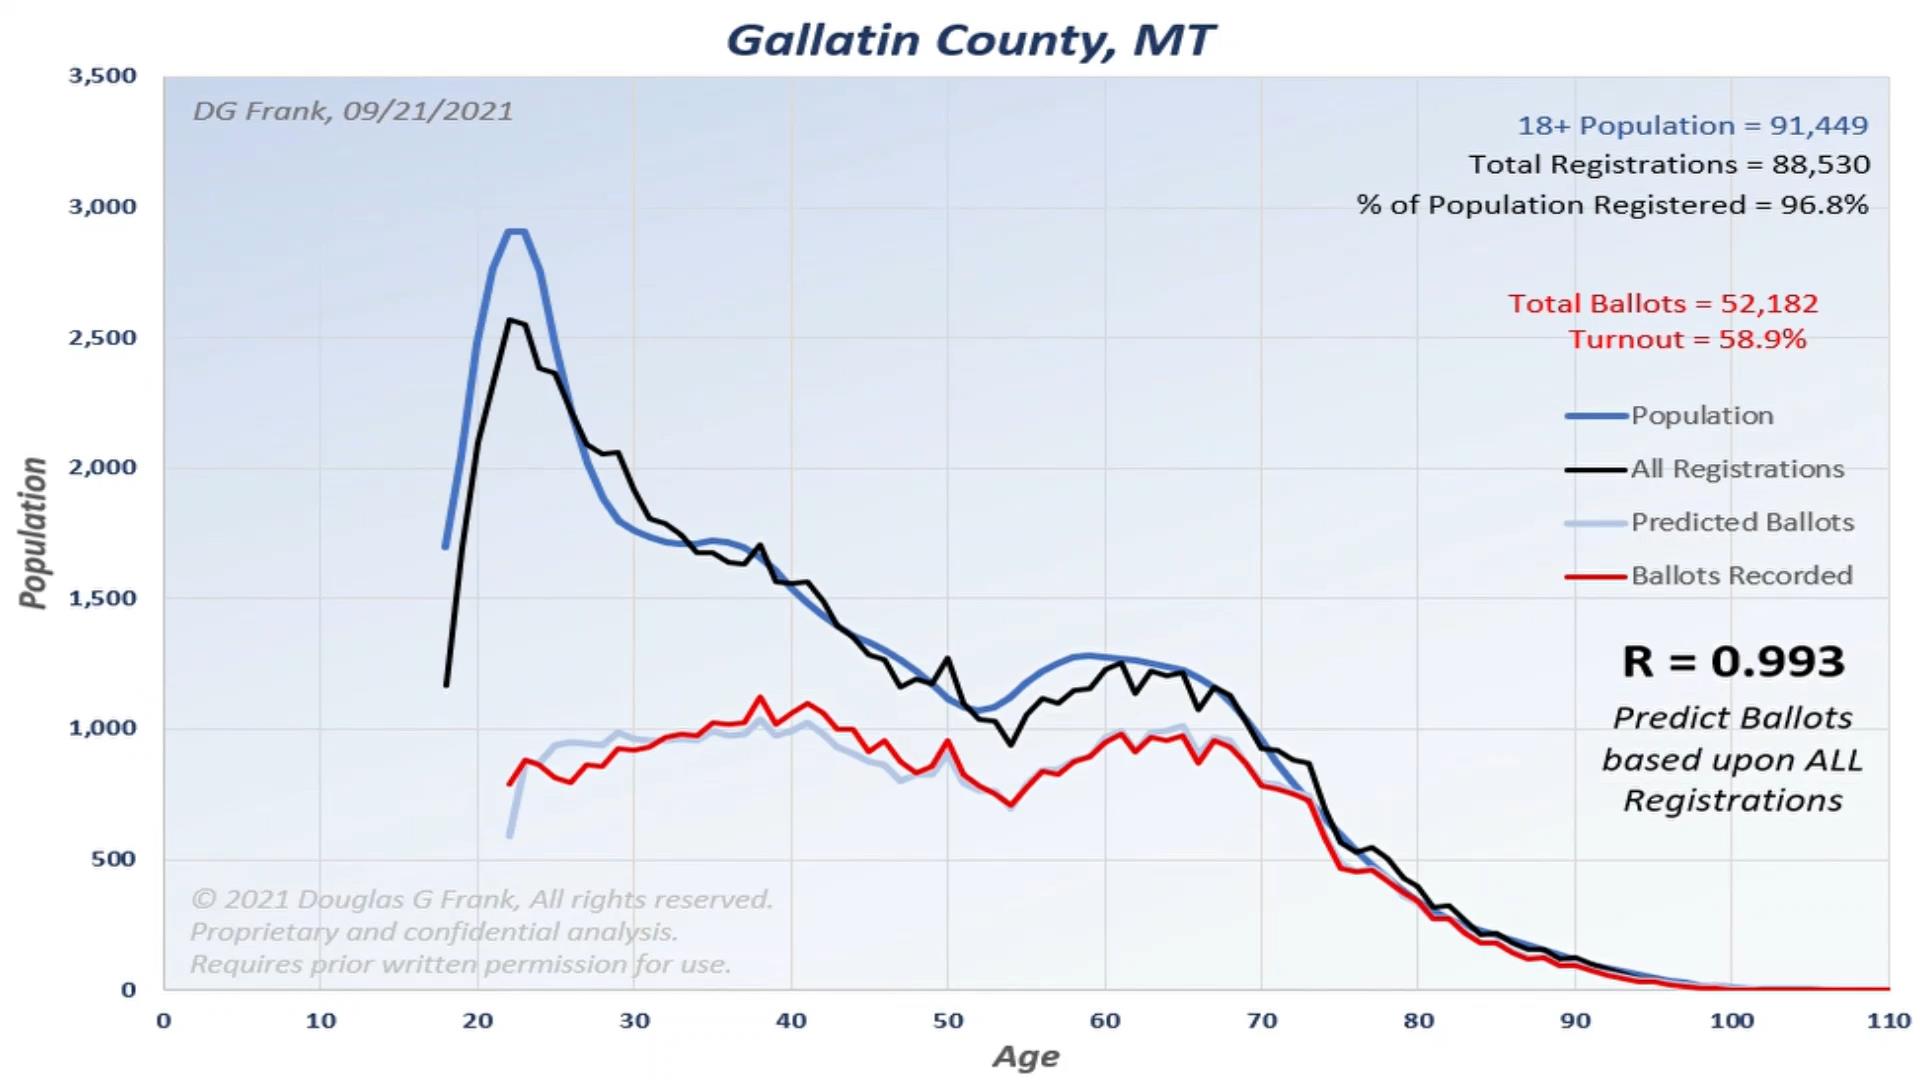 Gallatin County 2020 Election Analysis Chart by Dr. Doug Frank